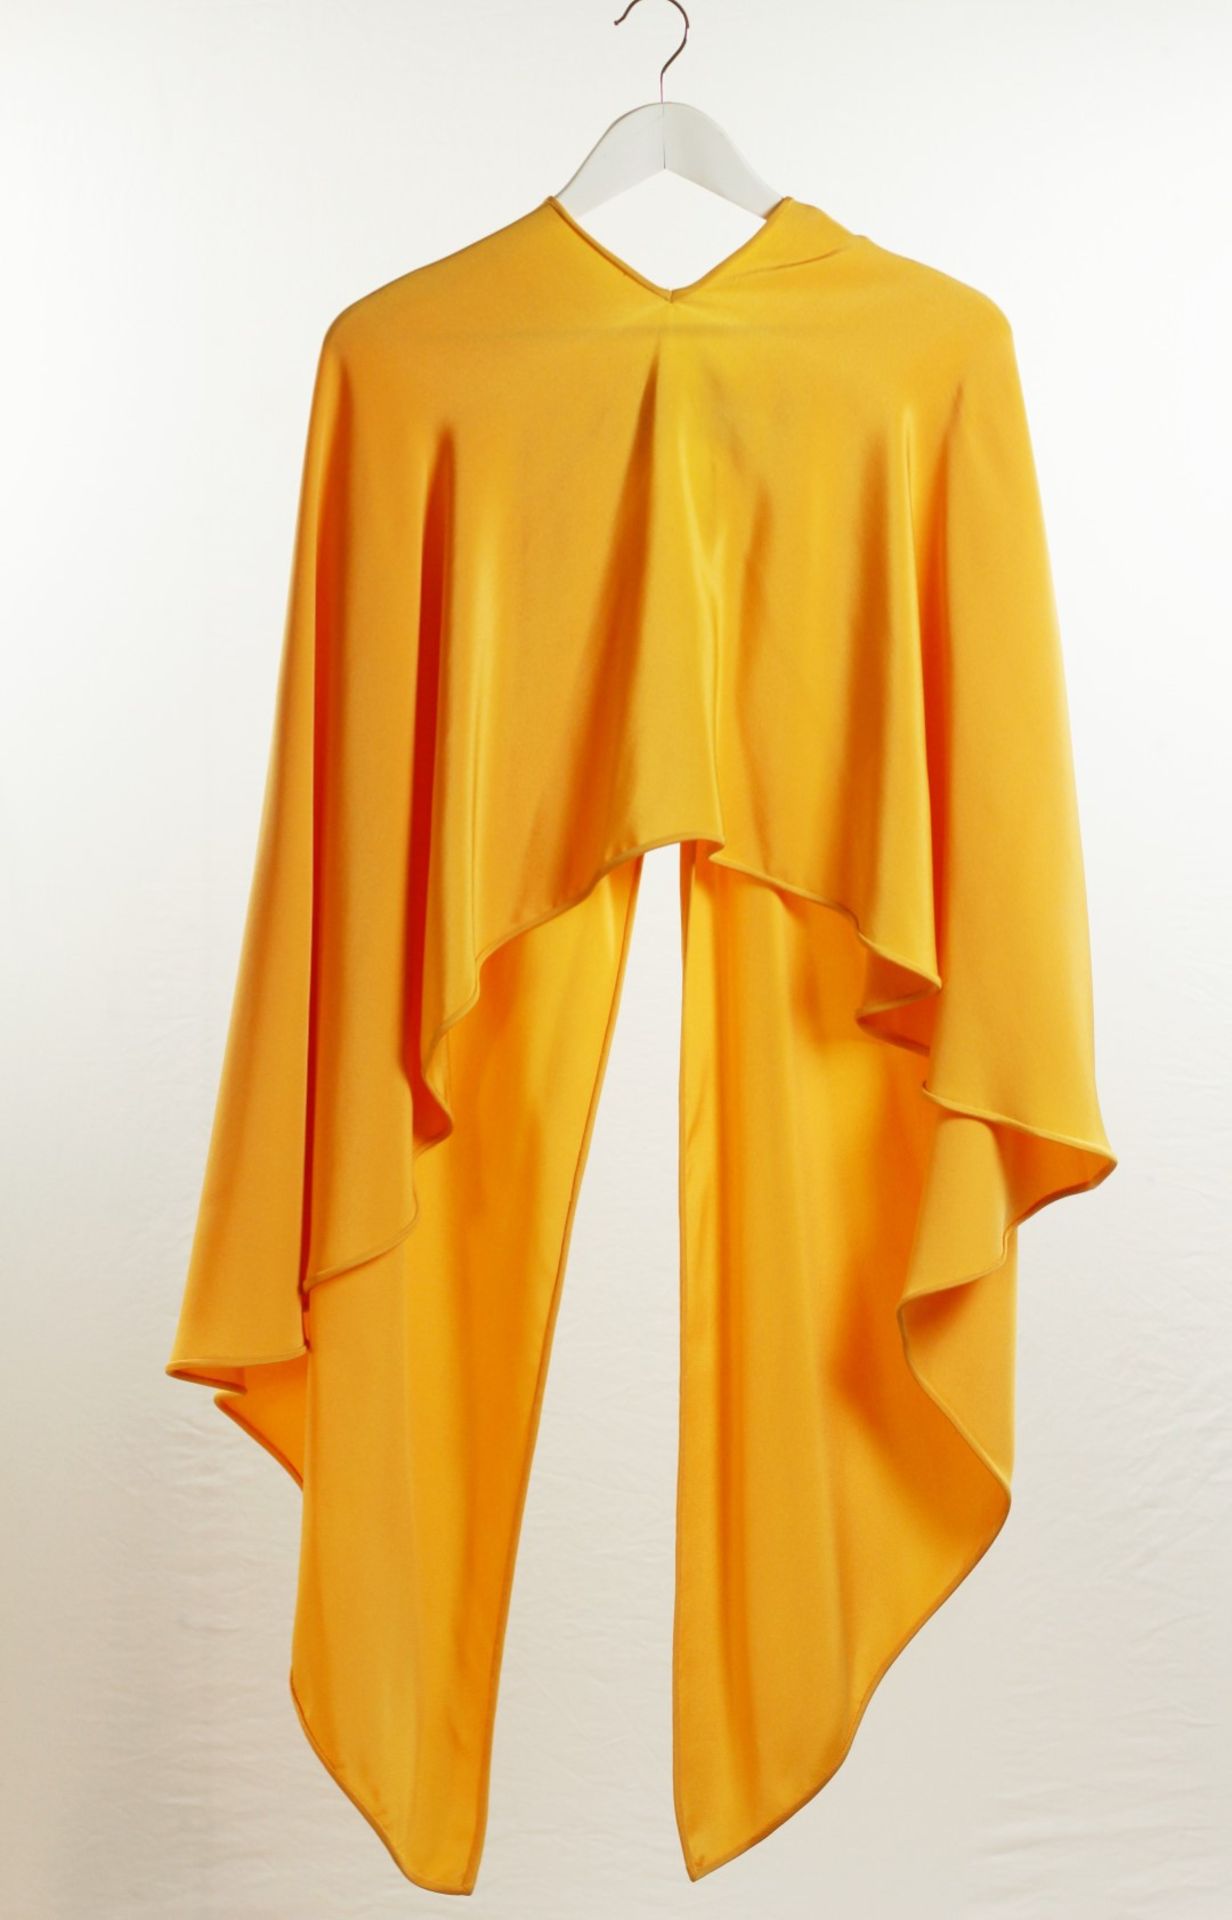 1 x Boutique Le Duc Apricot Wrap/Shawl - From a High End Clothing Boutique In The - Image 8 of 8